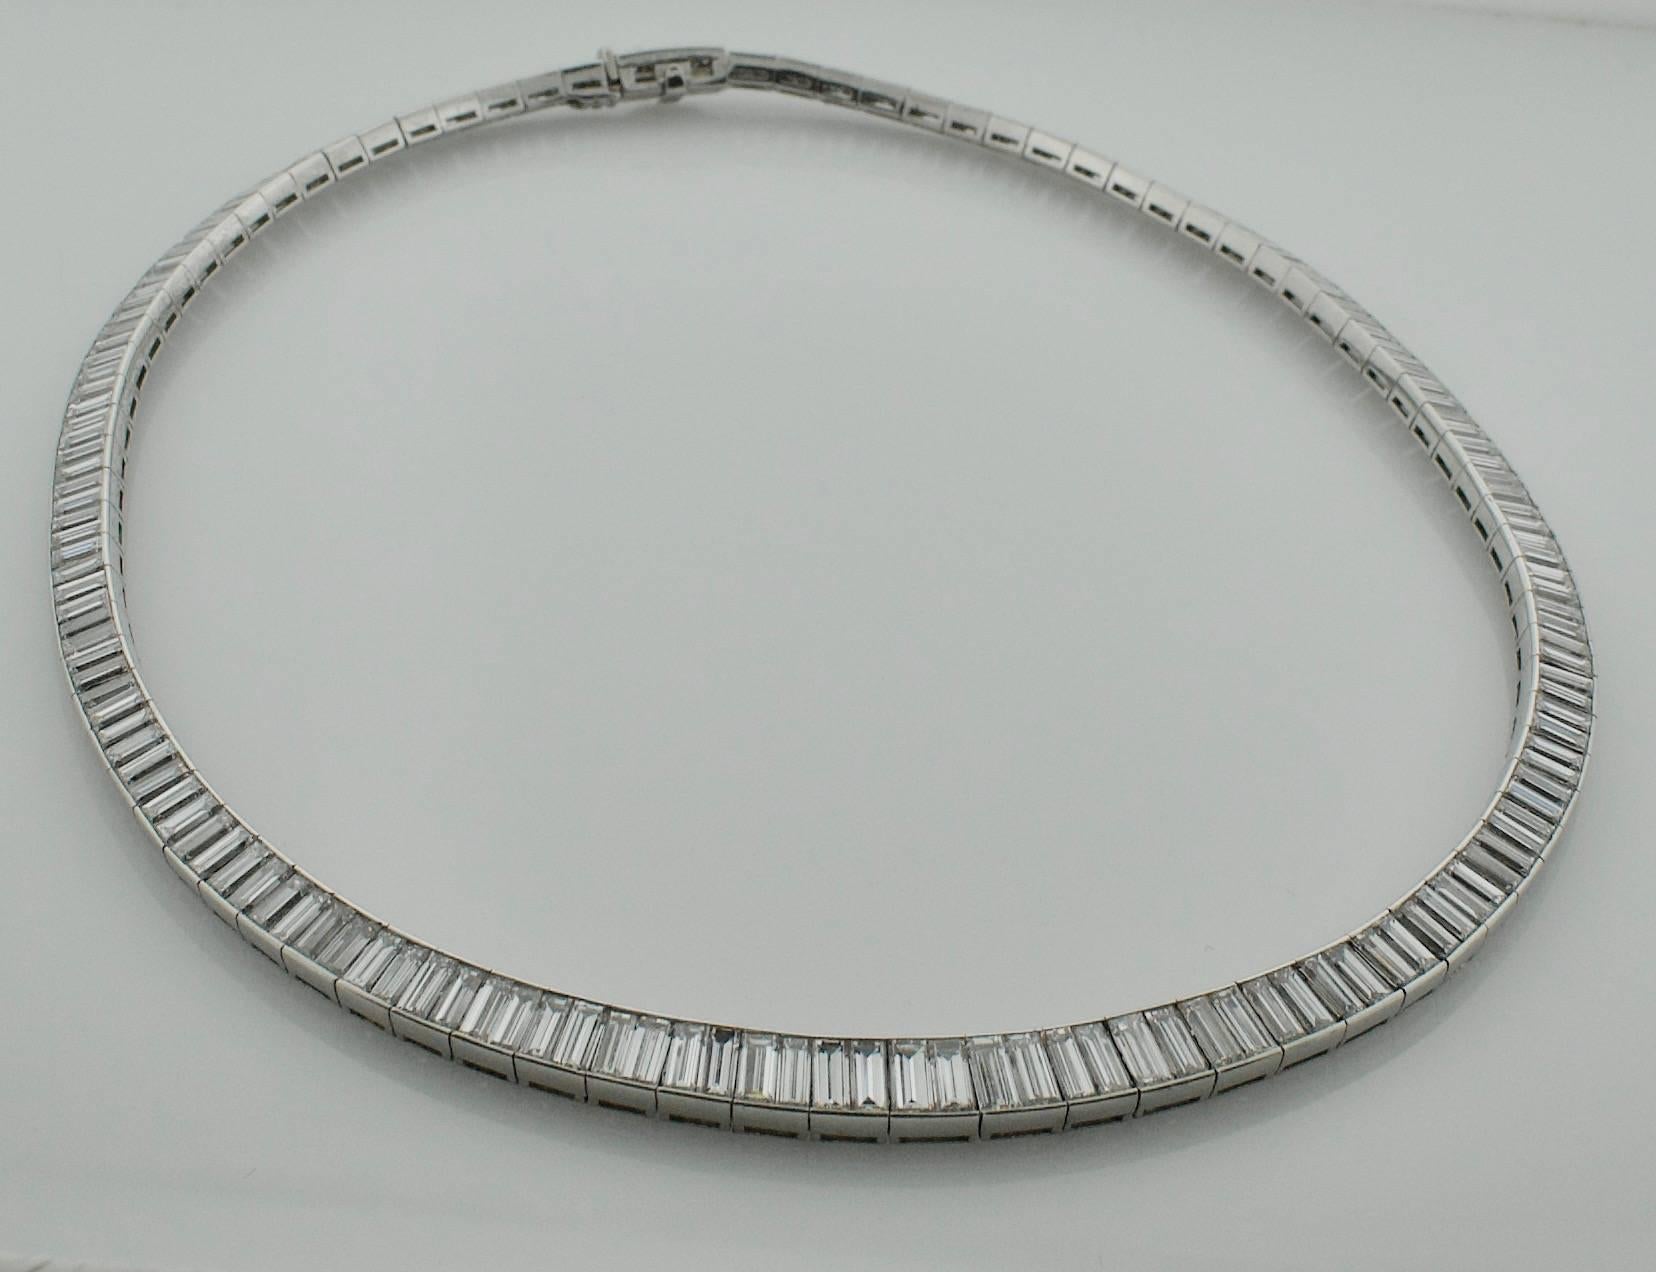 1940's Straight Line Baguette Diamond Necklace 36.00 carats
One Hundred and Seventy Two Baguette Cut Diamonds weighing 36.00 carats approximately [GH-VVS-VS]
Slightly Tapered 6.5 mm to 4.5 mm at the clasp
Wonderfully made fells like silk on the back